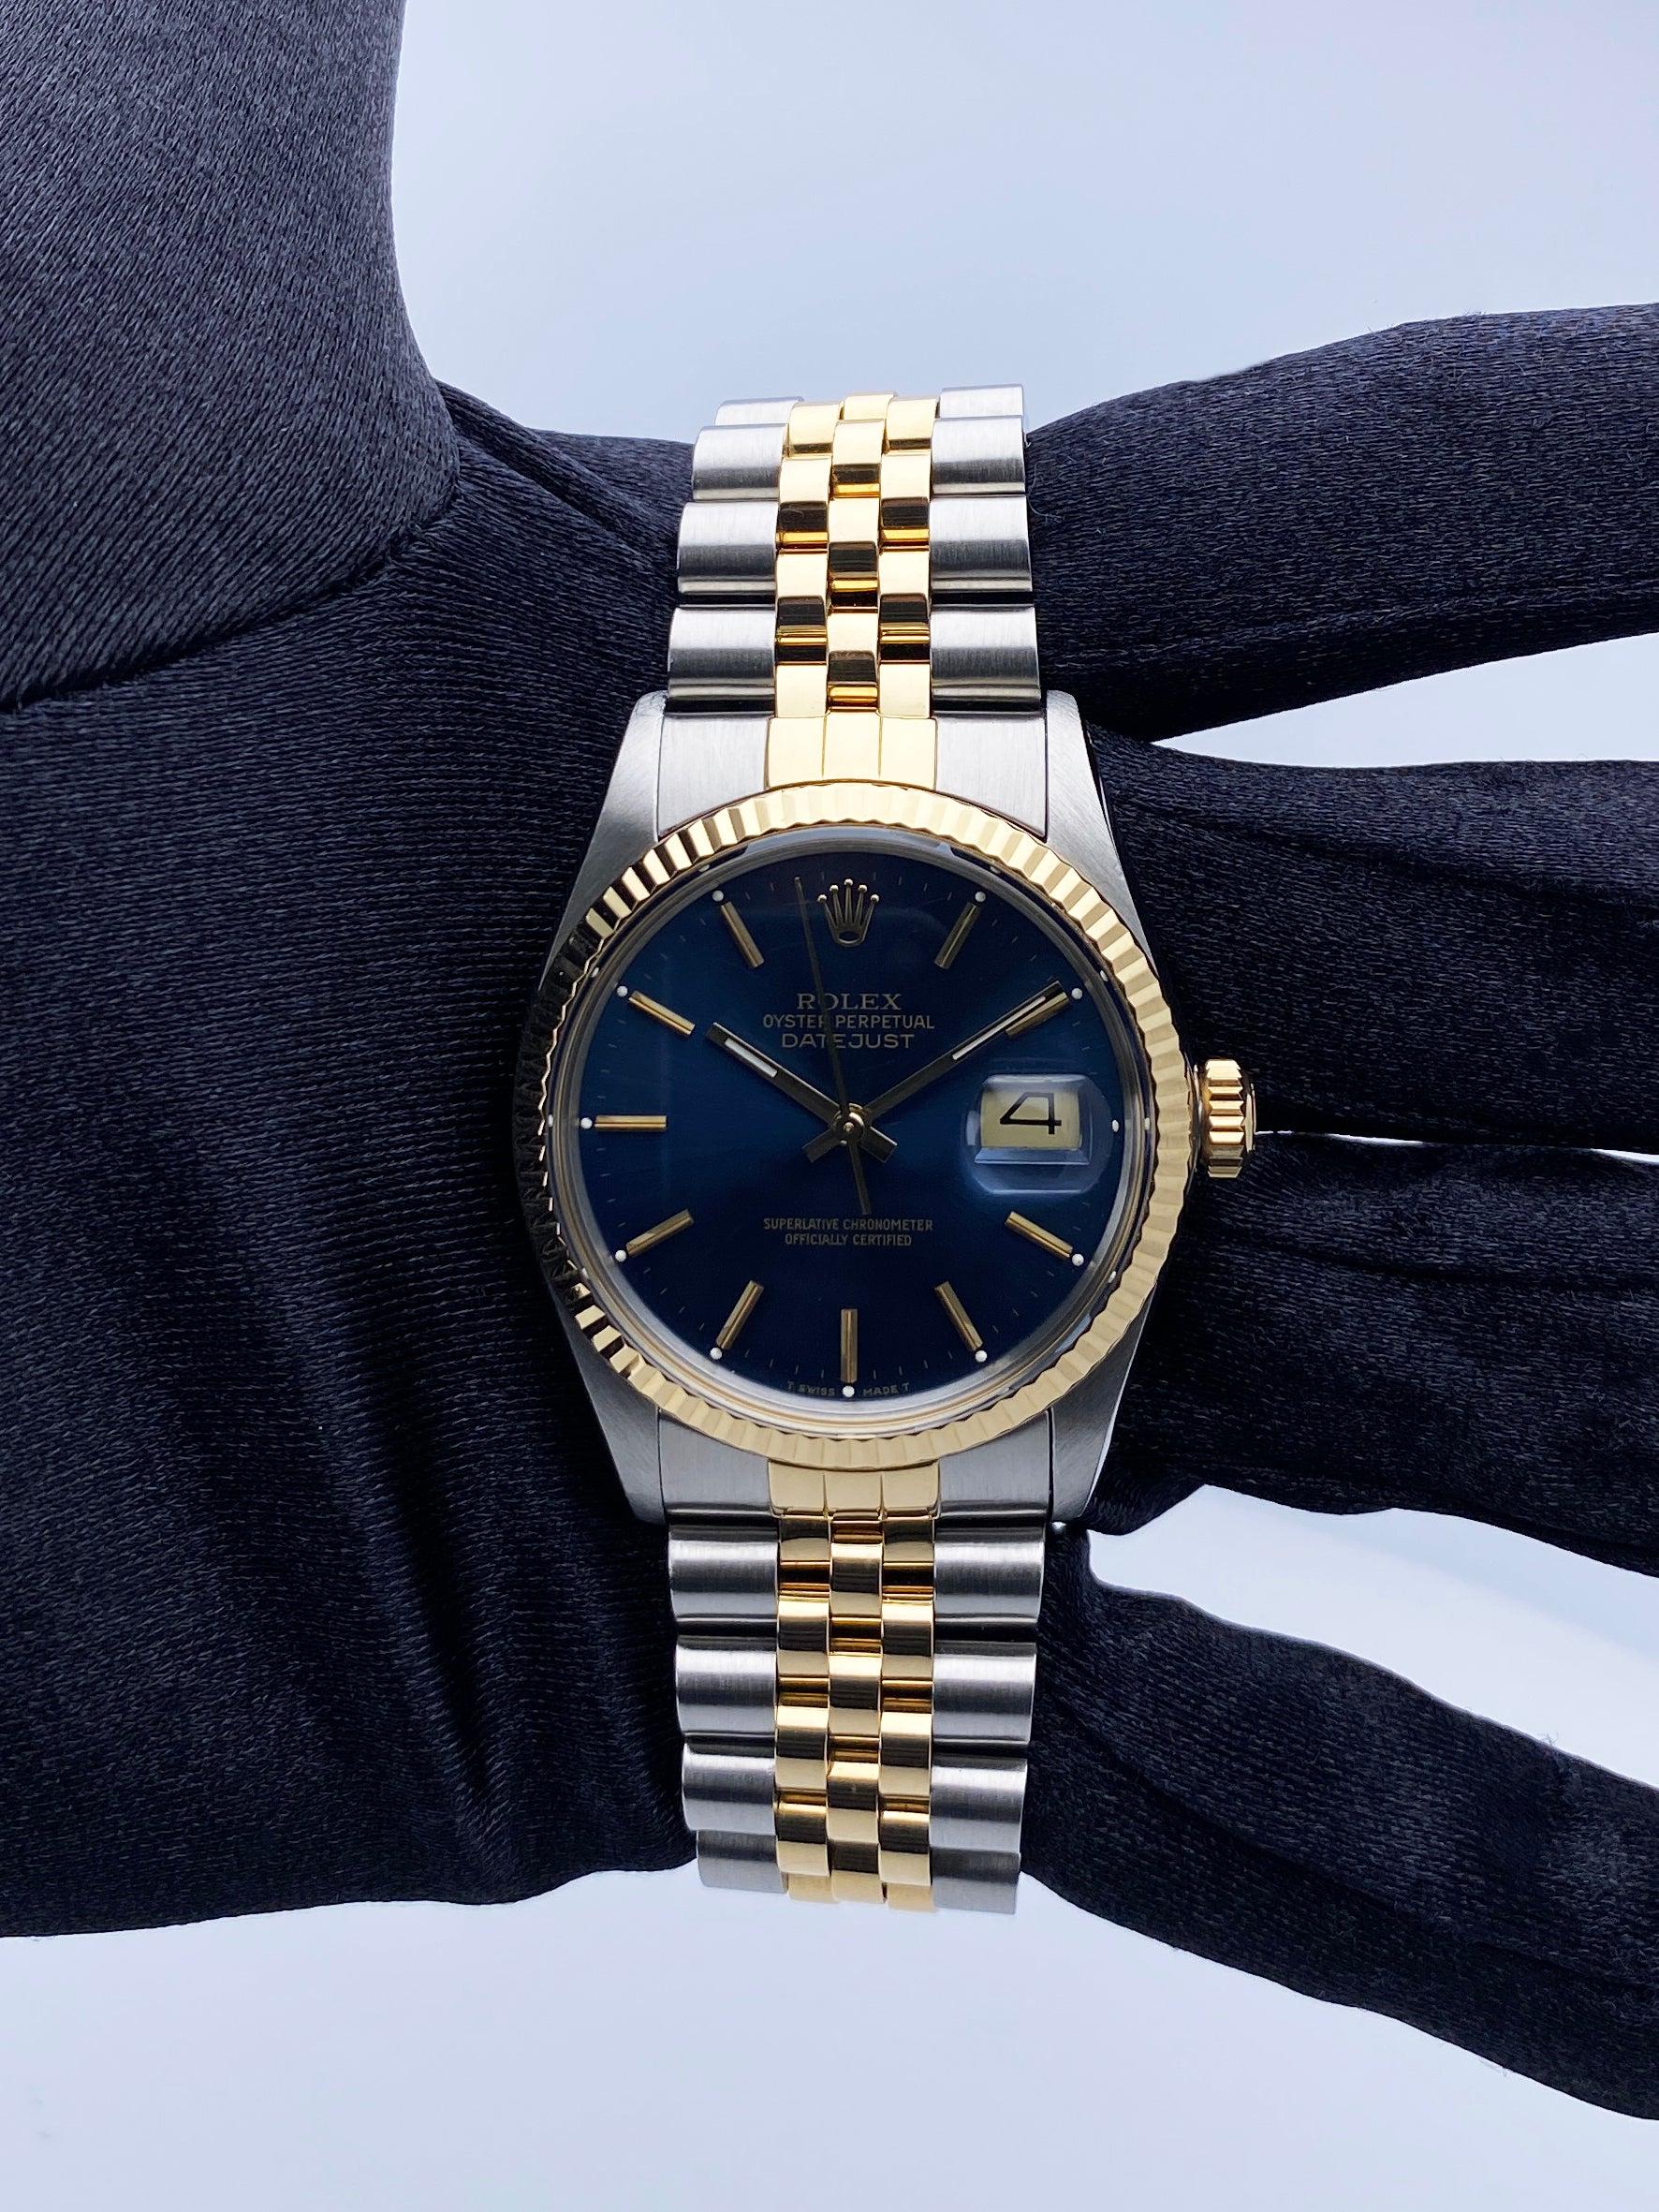 Rolex Datejust 16013 Mens Watch. 36mm stainless steel case. 18K yellow gold fluted bezel. Blue dial with gold hands and index hour markers. Minute markers on the outer dial. Date display at the 3 o'clock position. Stainless steel & 18K yellow gold